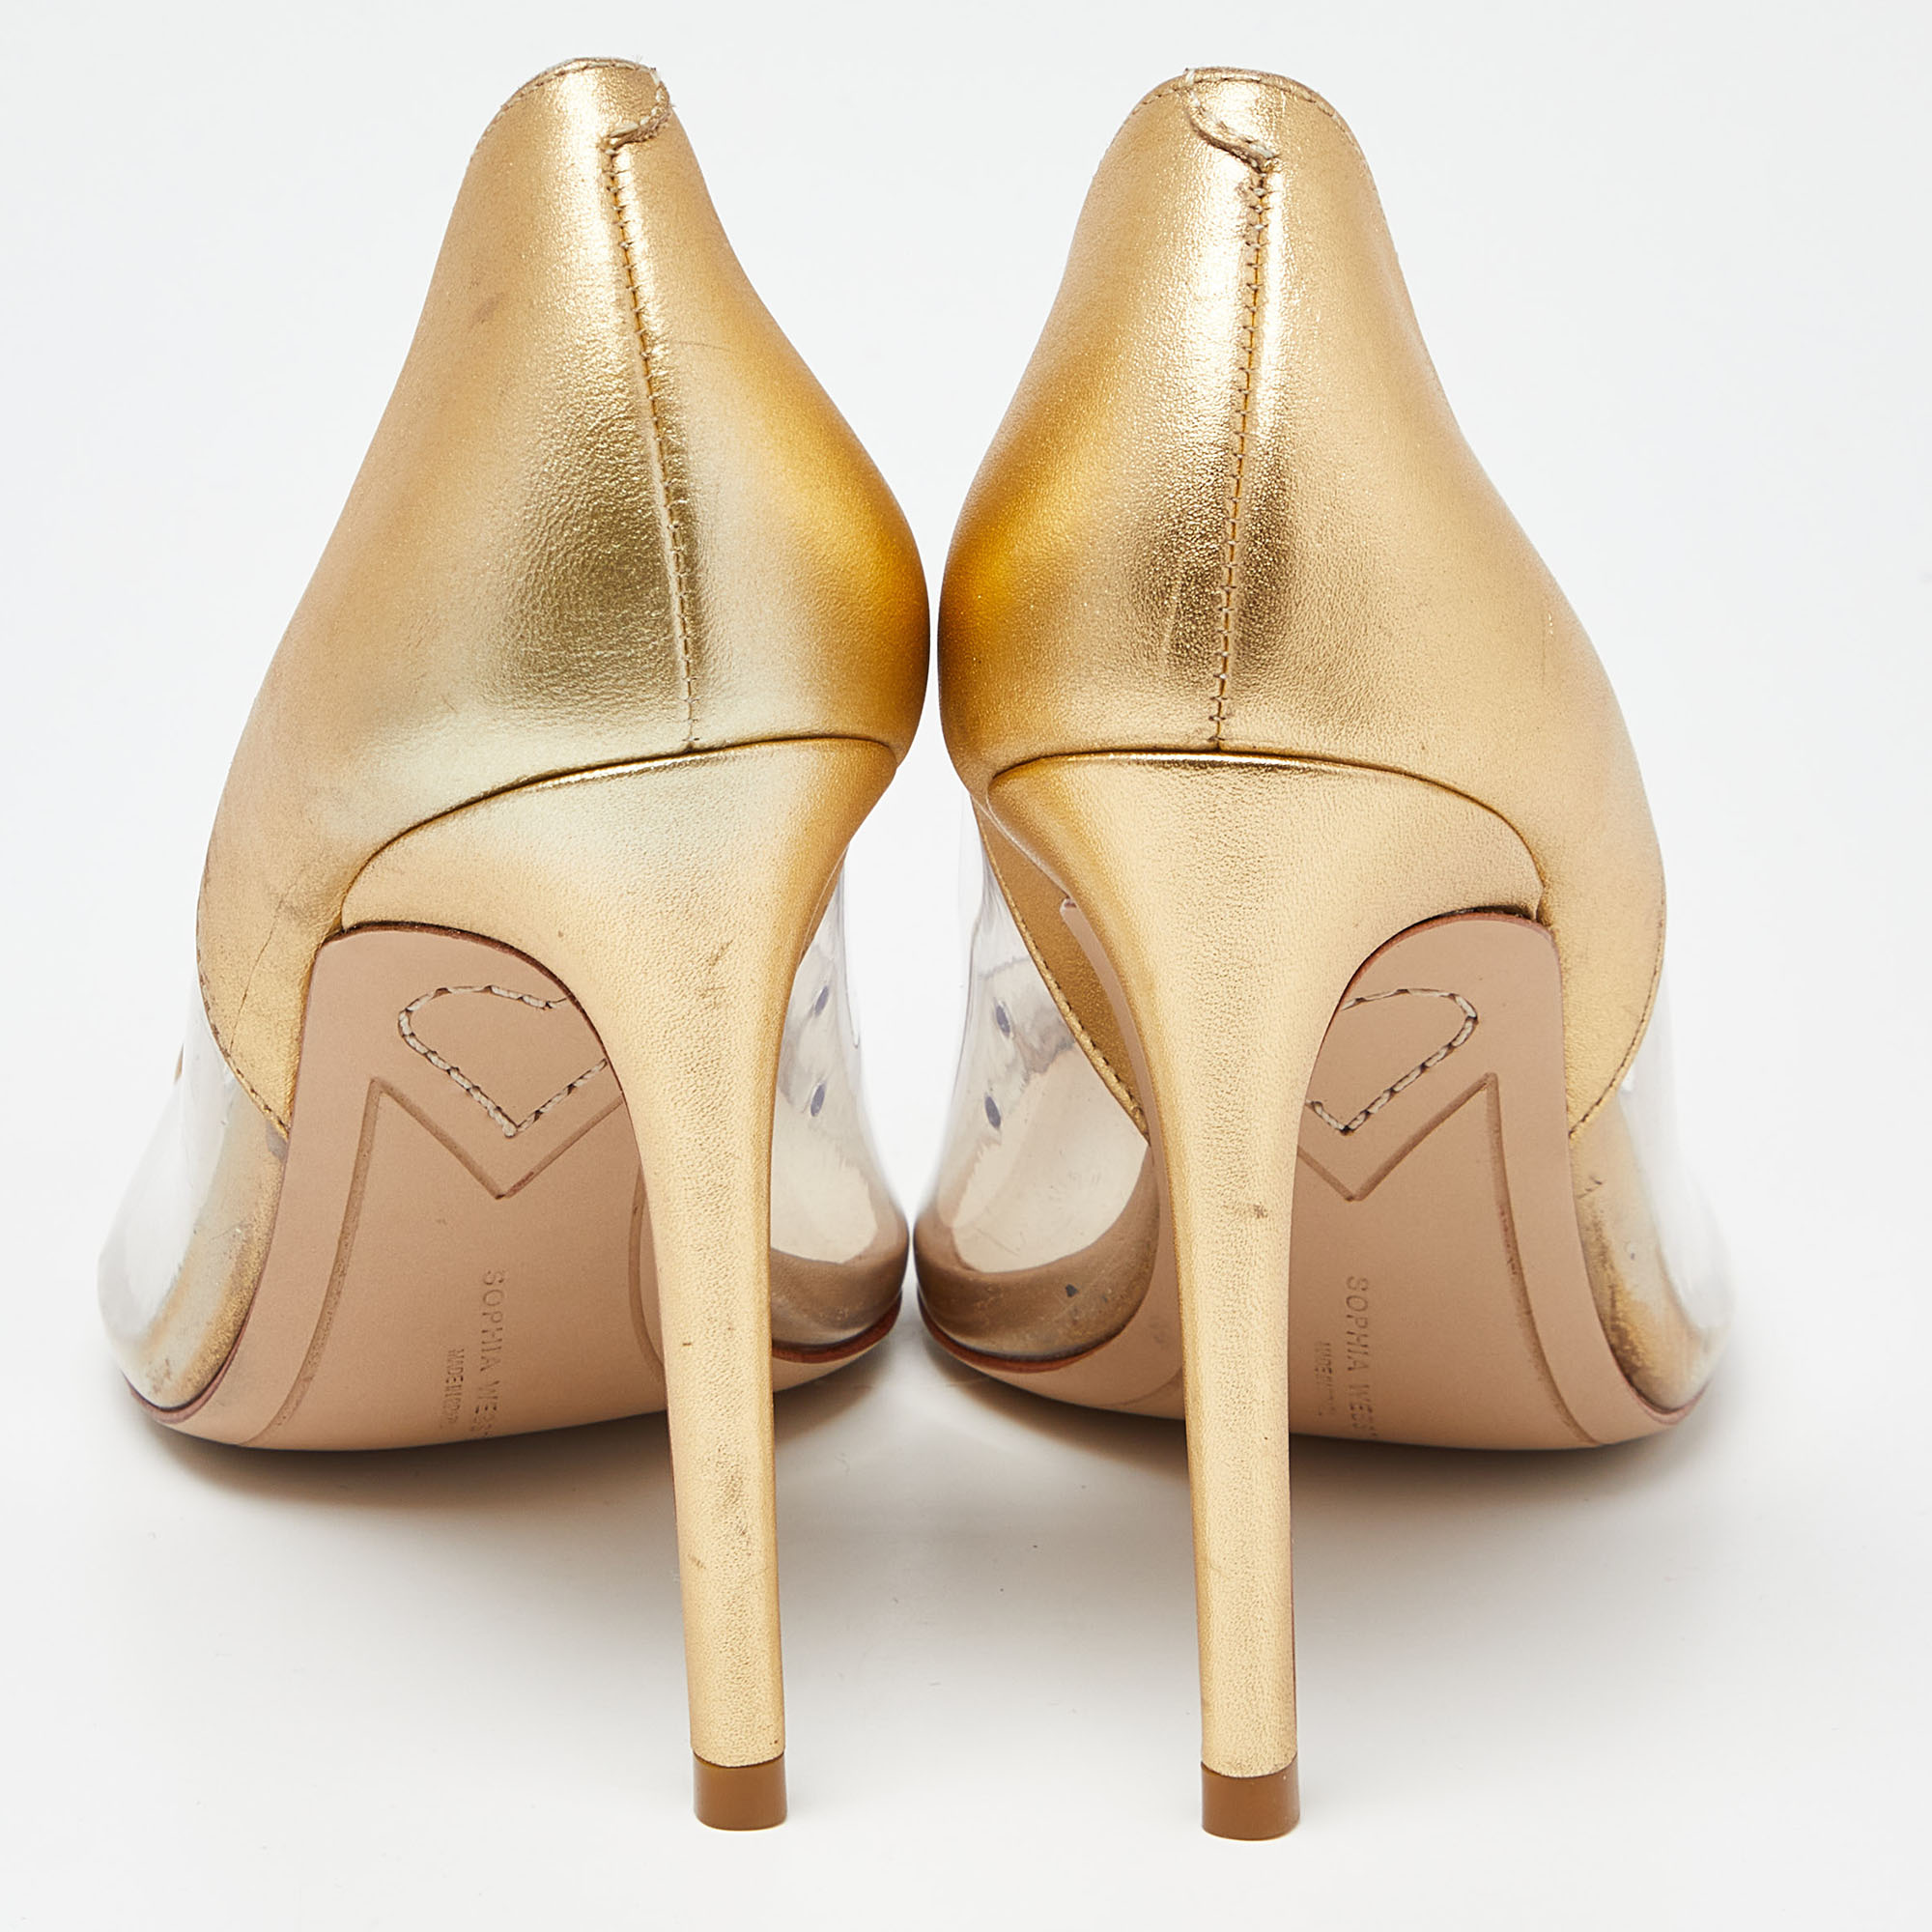 Sophia Webster Gold/Transparent Leather And PVC Pointed Toe Pumps Size 38.5